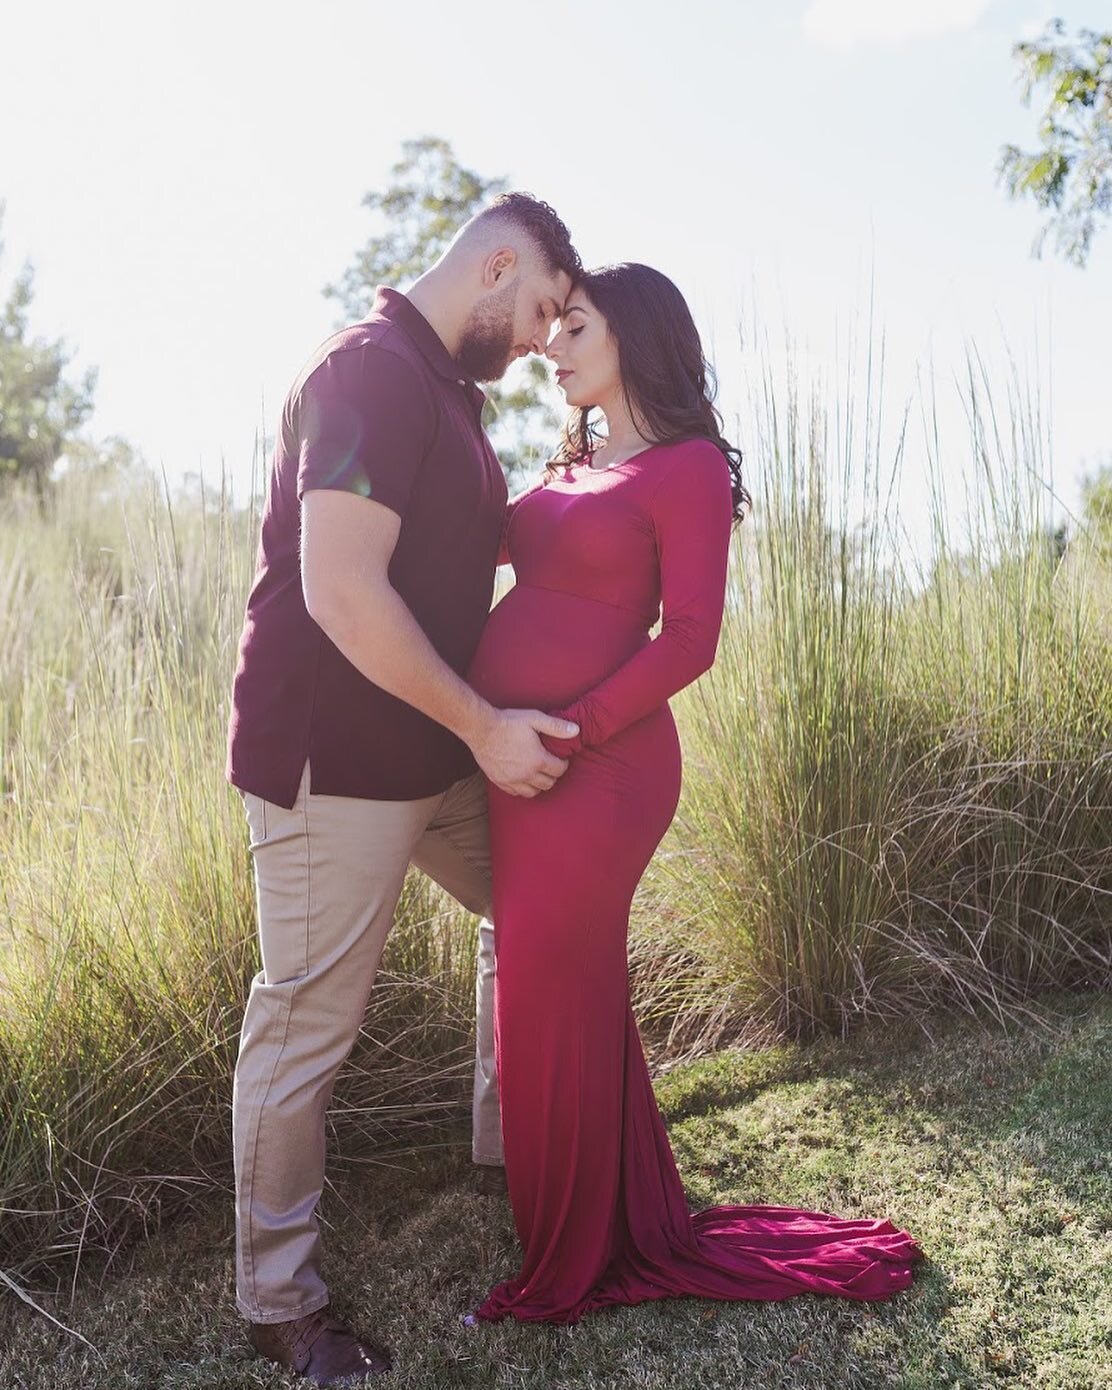 And then there were three 💕

Thank you for trusting me in capturing your maternity photos and for driving down from Georgia 🙏🏼😍 
-
-
-
#maternityshoot #maternityphotoshoot #raleighncphotographer 
#coupleshoot #couplesphotography #raleighcouplesph